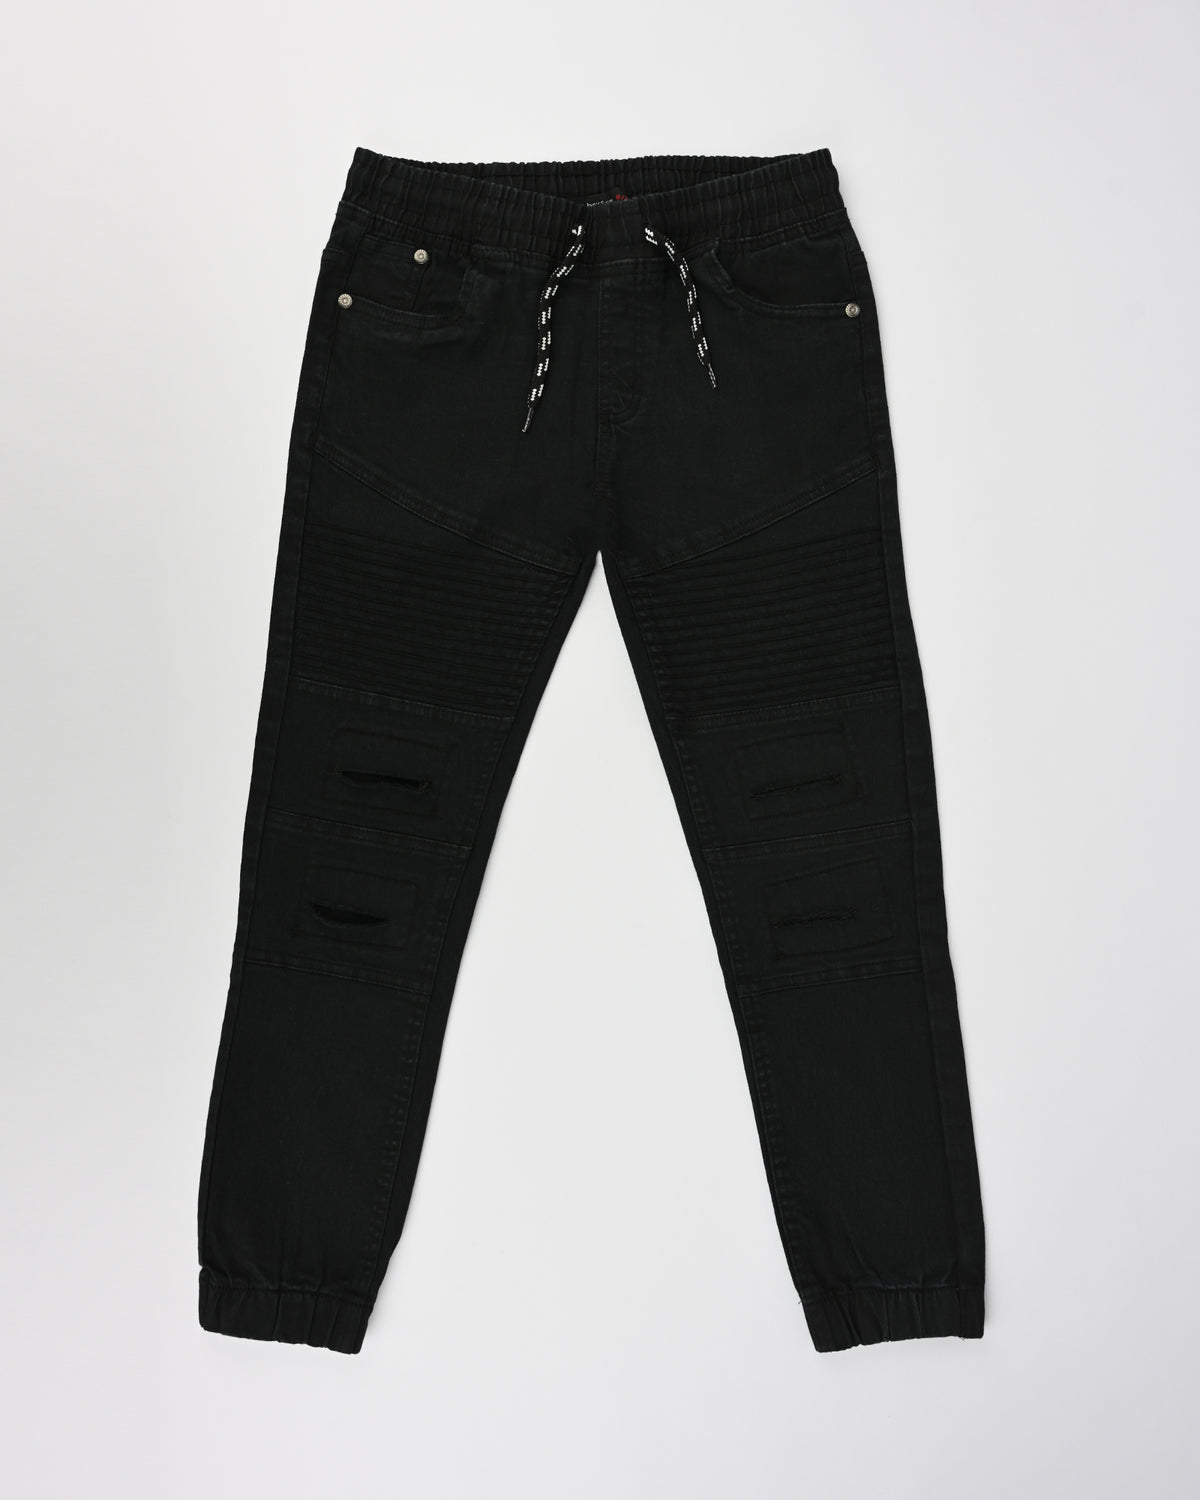 Boys Joggers Jeans Comfortable and Stylish for Active Days